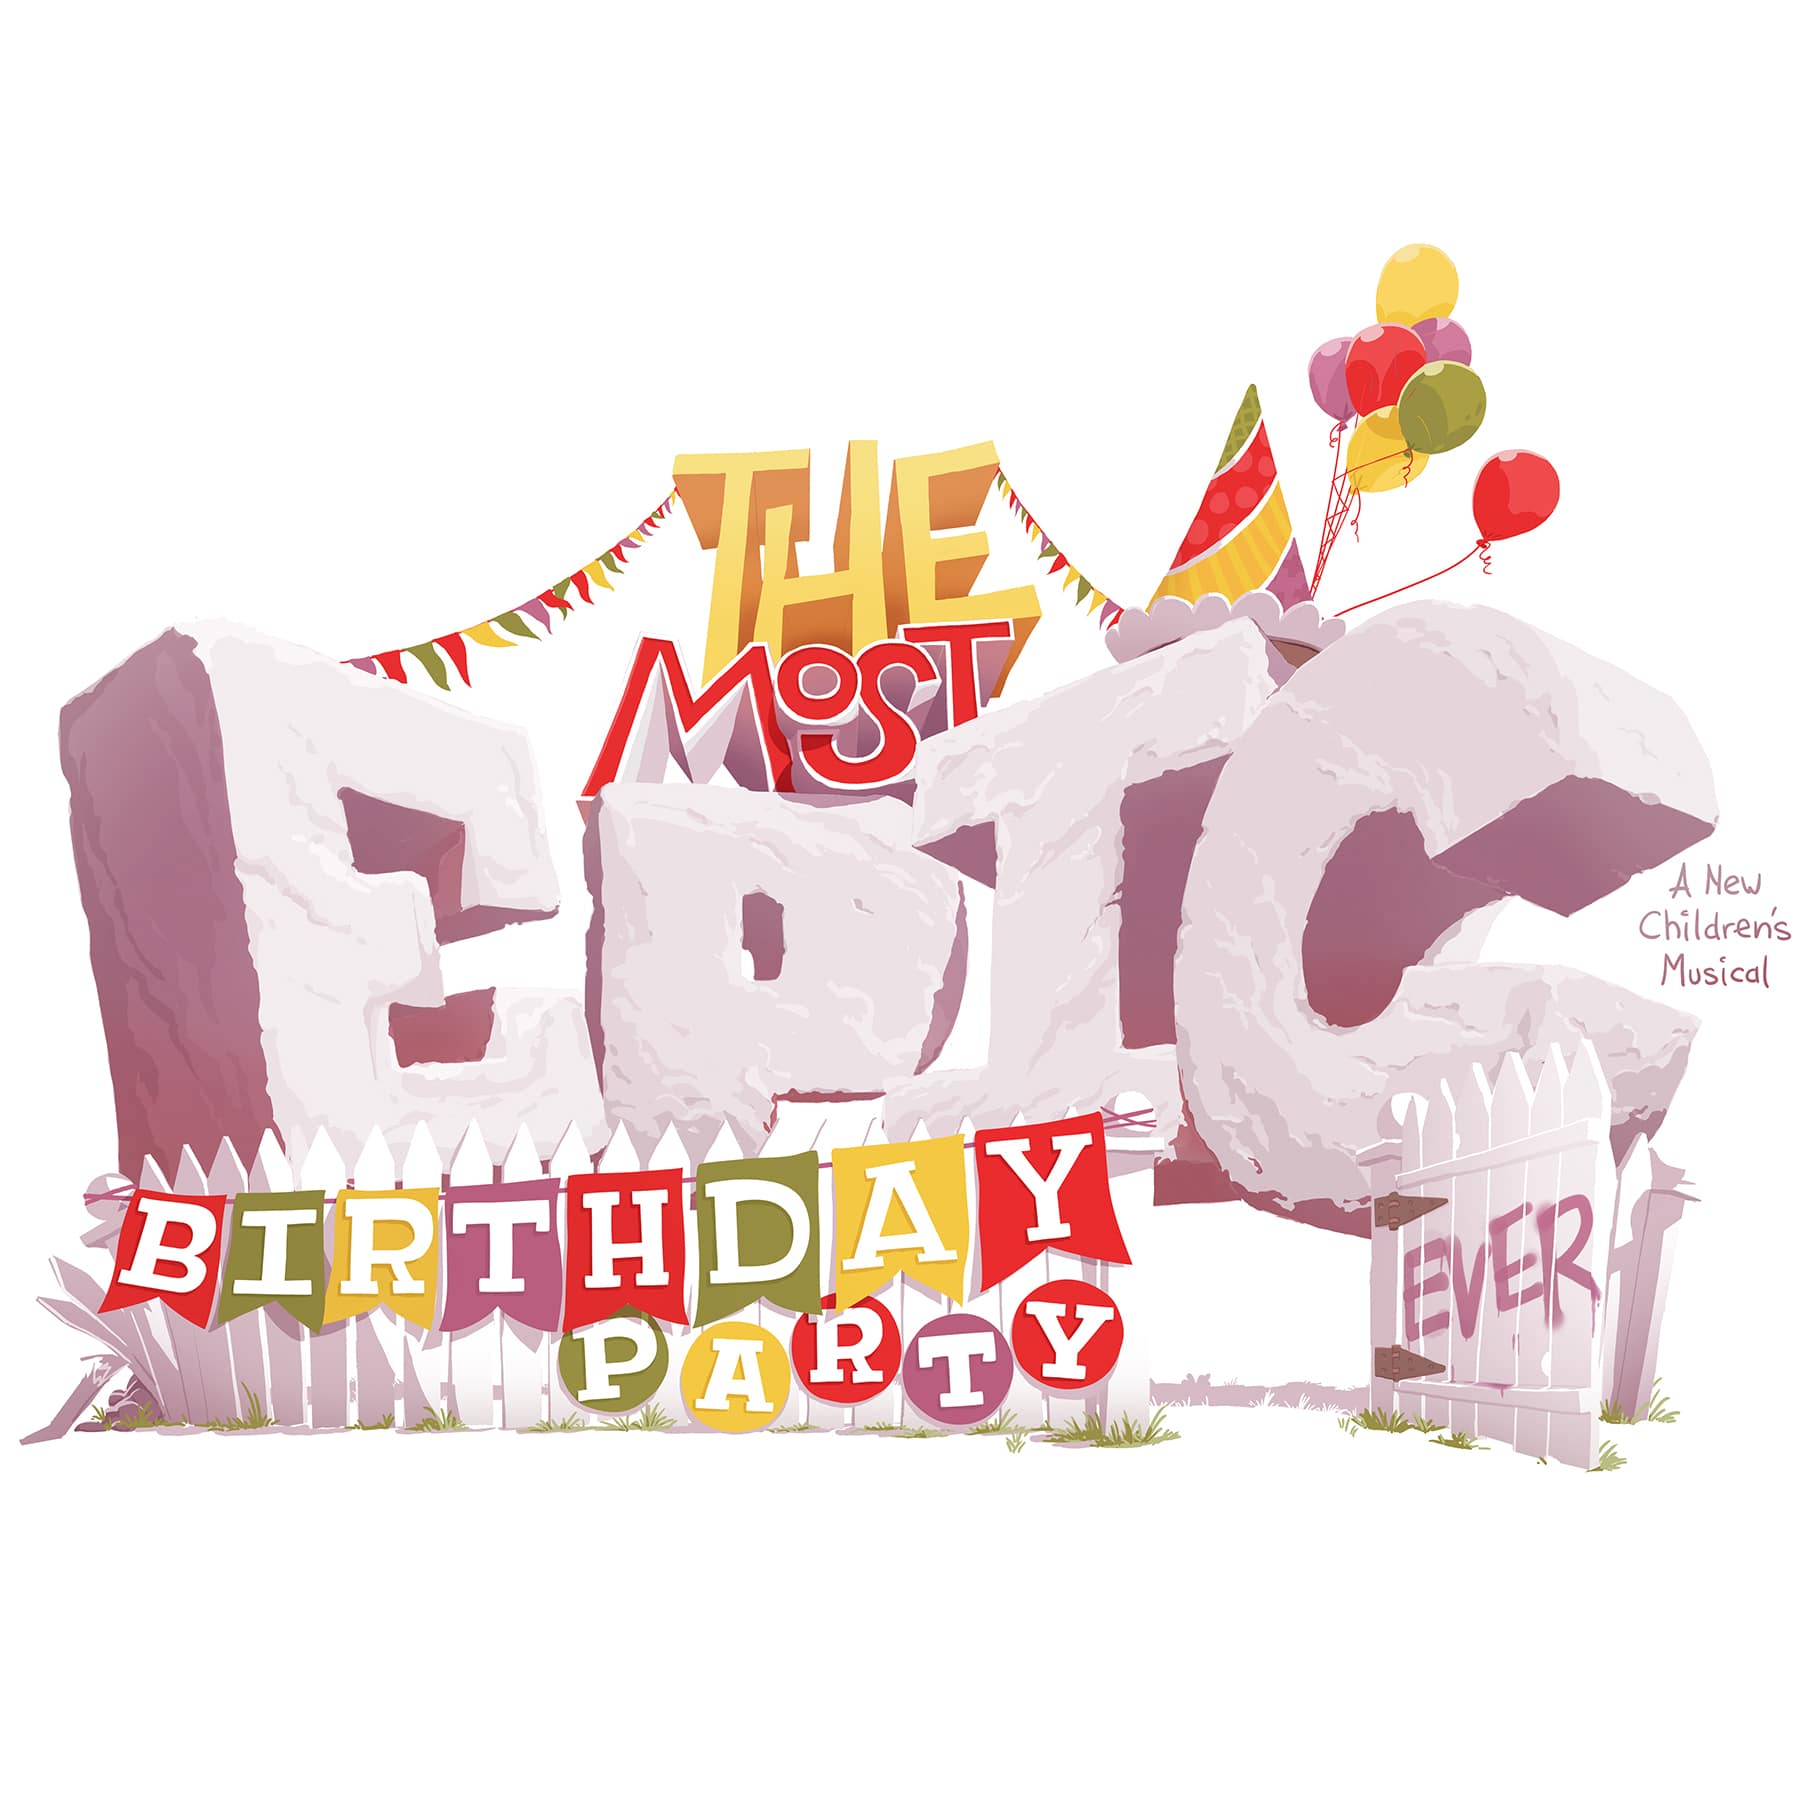 Party　Musical　New　Most　A　Kit　Children's　Epic　The　Ever:　Birthday　Production